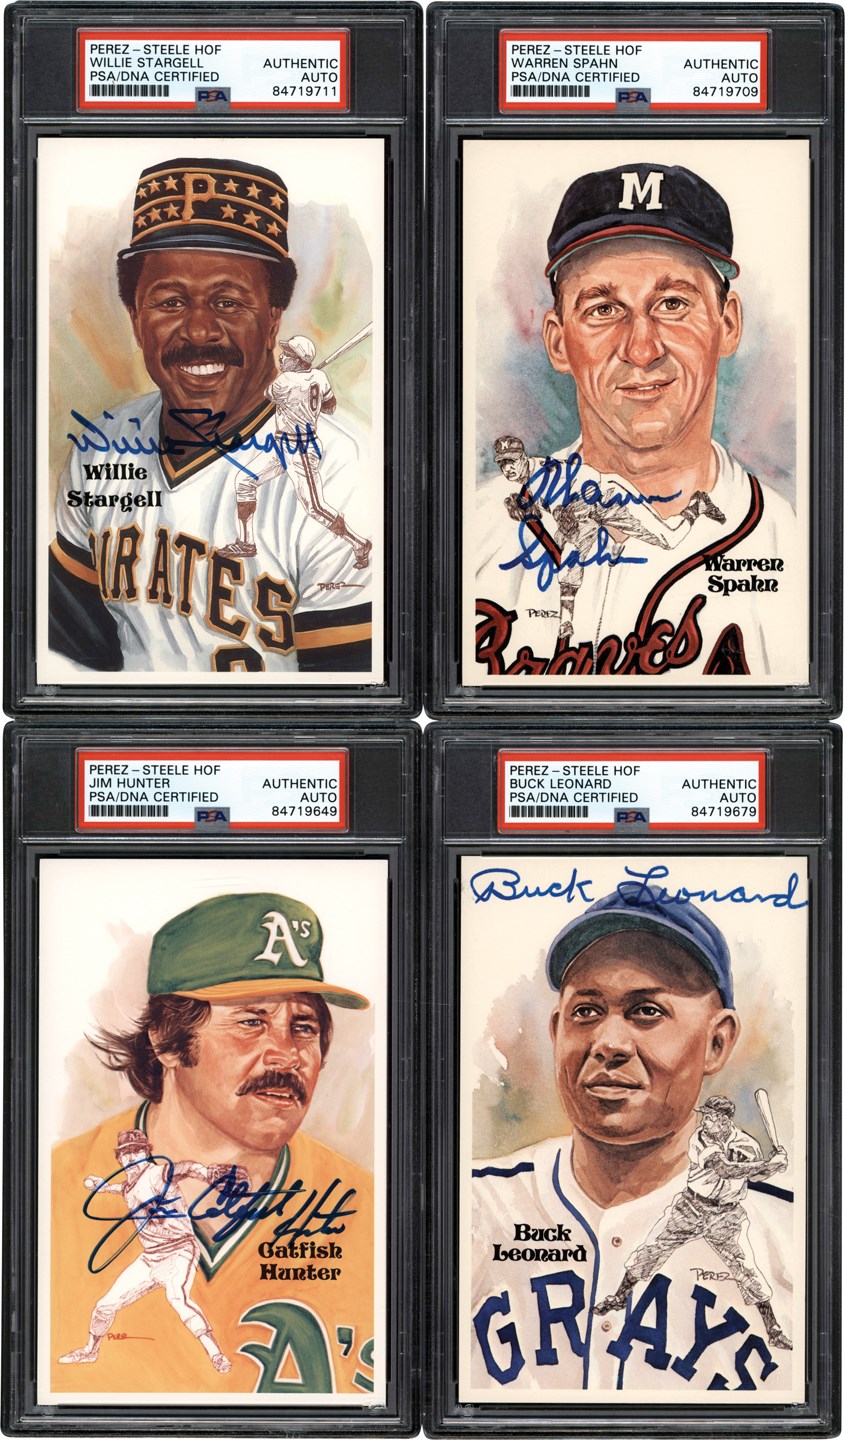 Baseball Autographs - Signed Perez-Steele Hall of Fame Postcard Collection (25) - Each Encapsulated by PSA